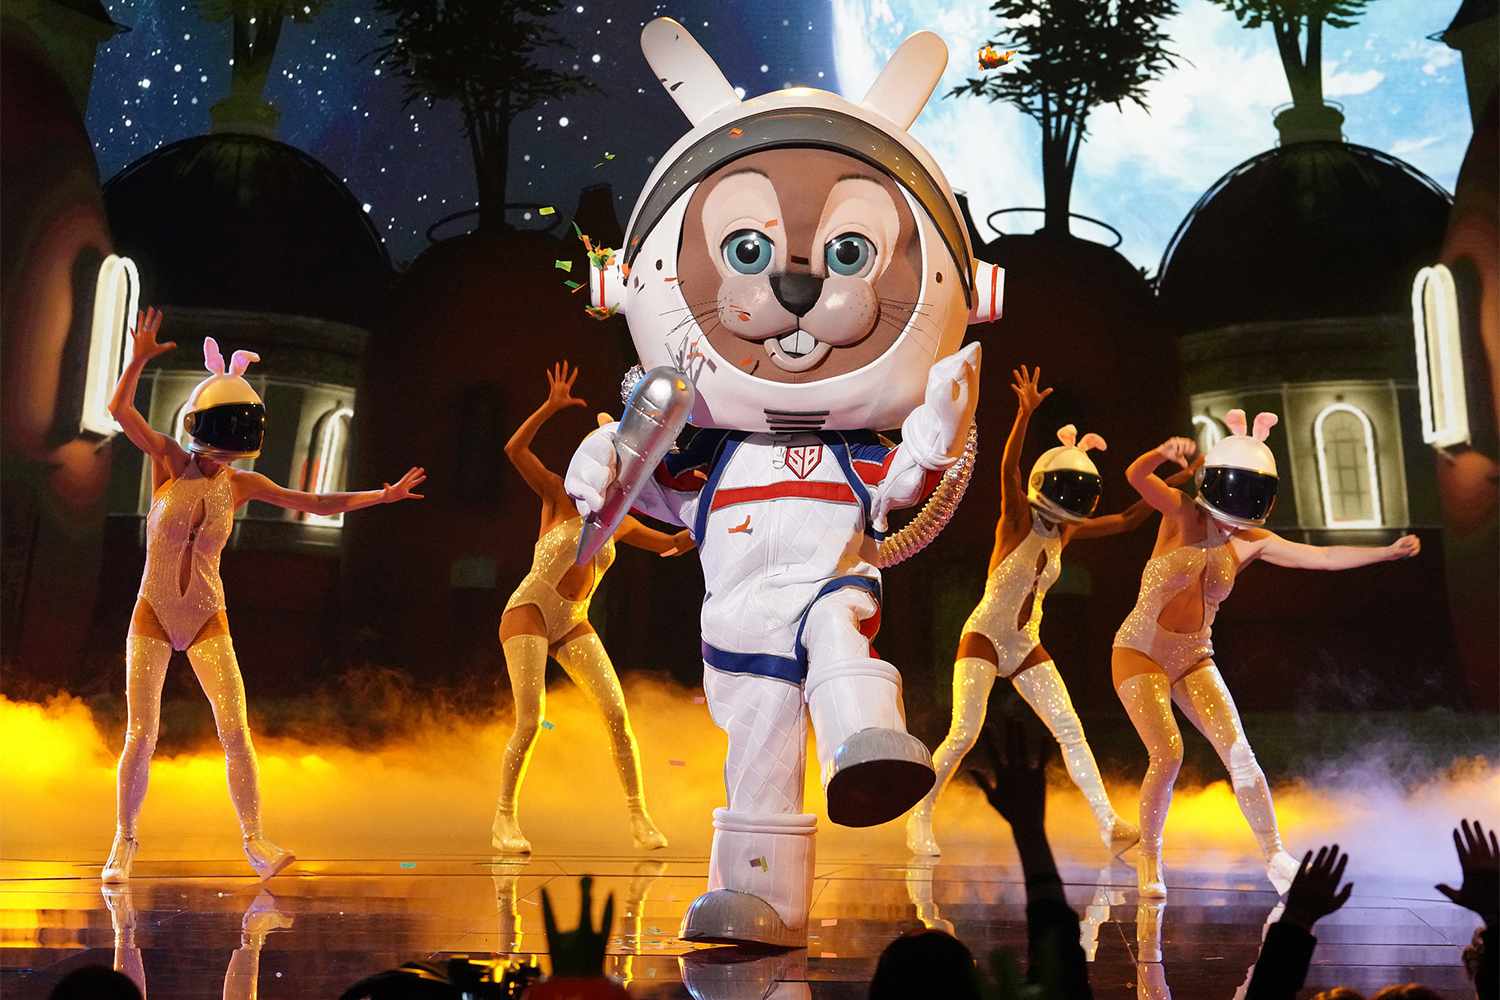 THE MASKED SINGER: Space Bunny in THE MASKED SINGER episode airing Wed. May 4